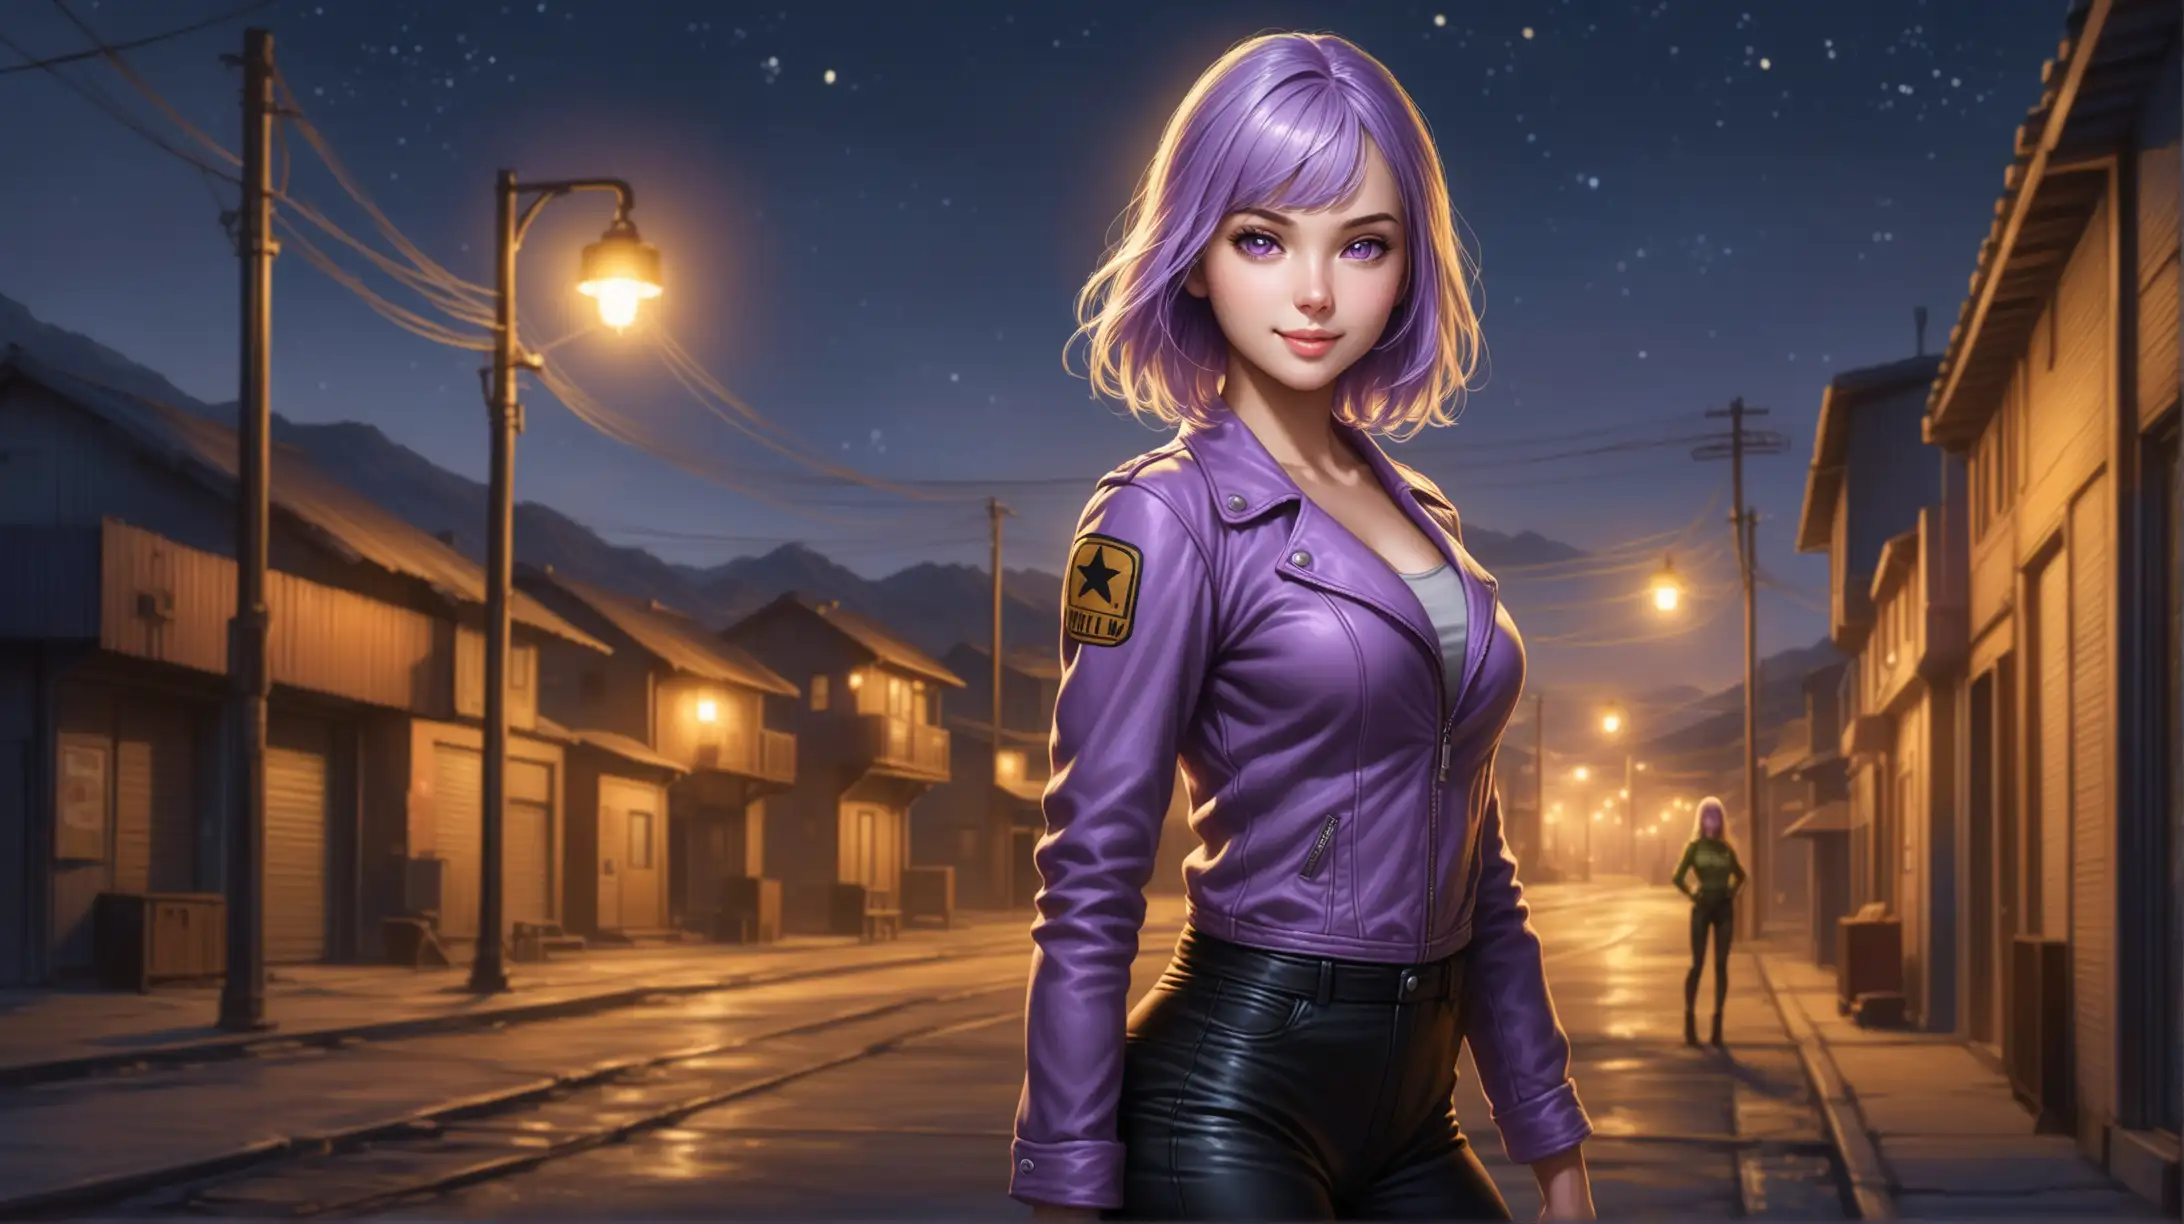 Woman with ShoulderLength Light Purple Hair in FalloutInspired Outfit at Night